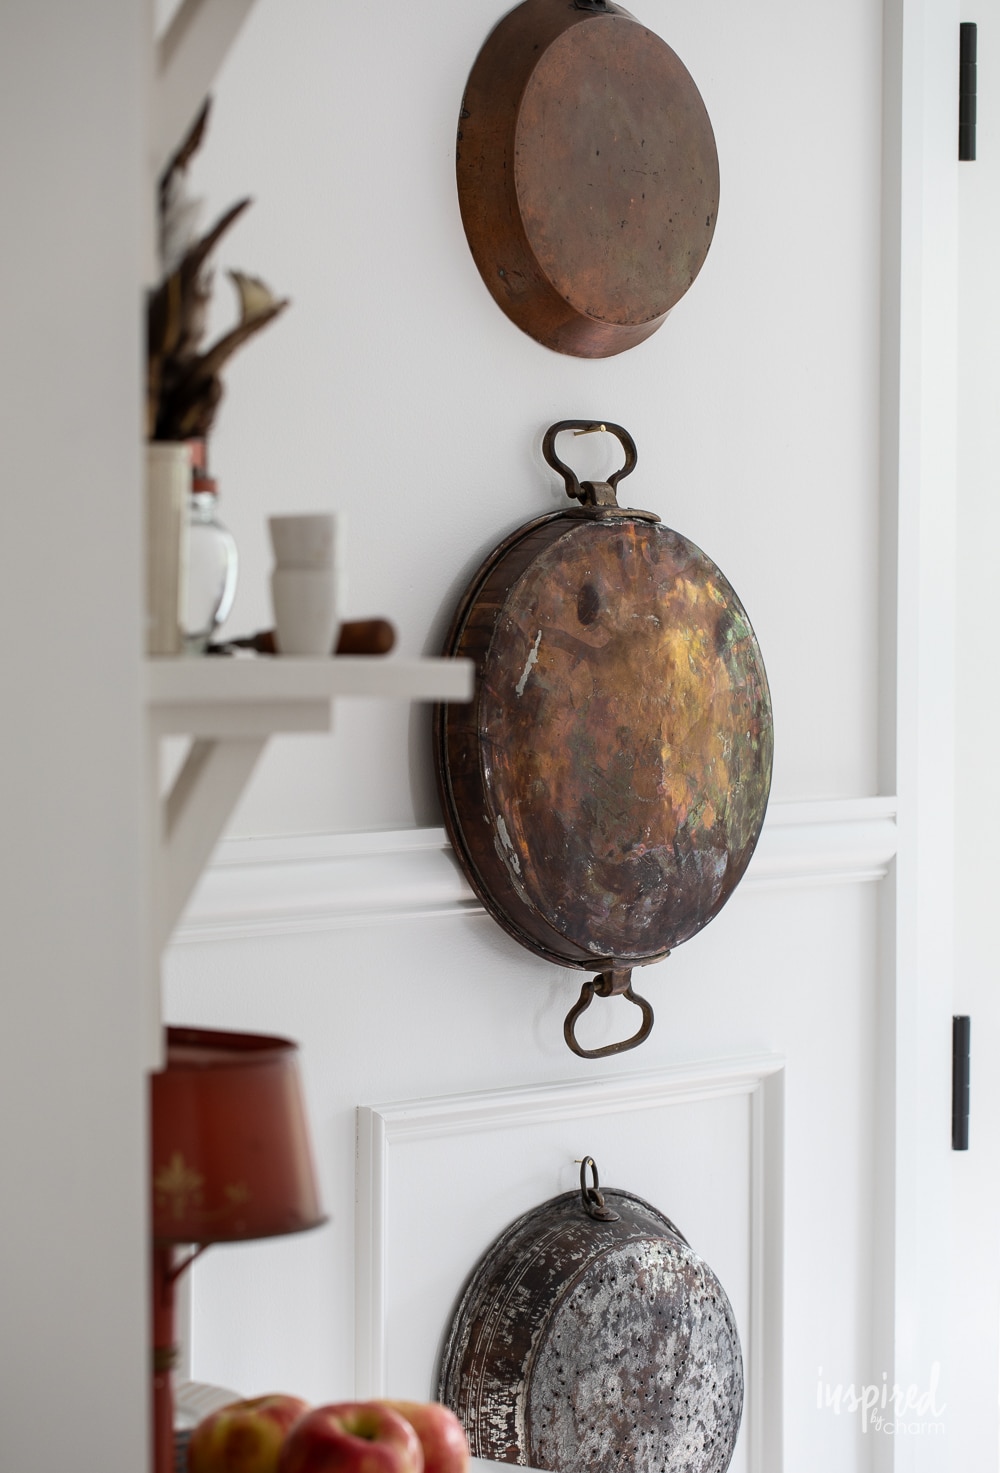 vintage copper pans hung on a wall.